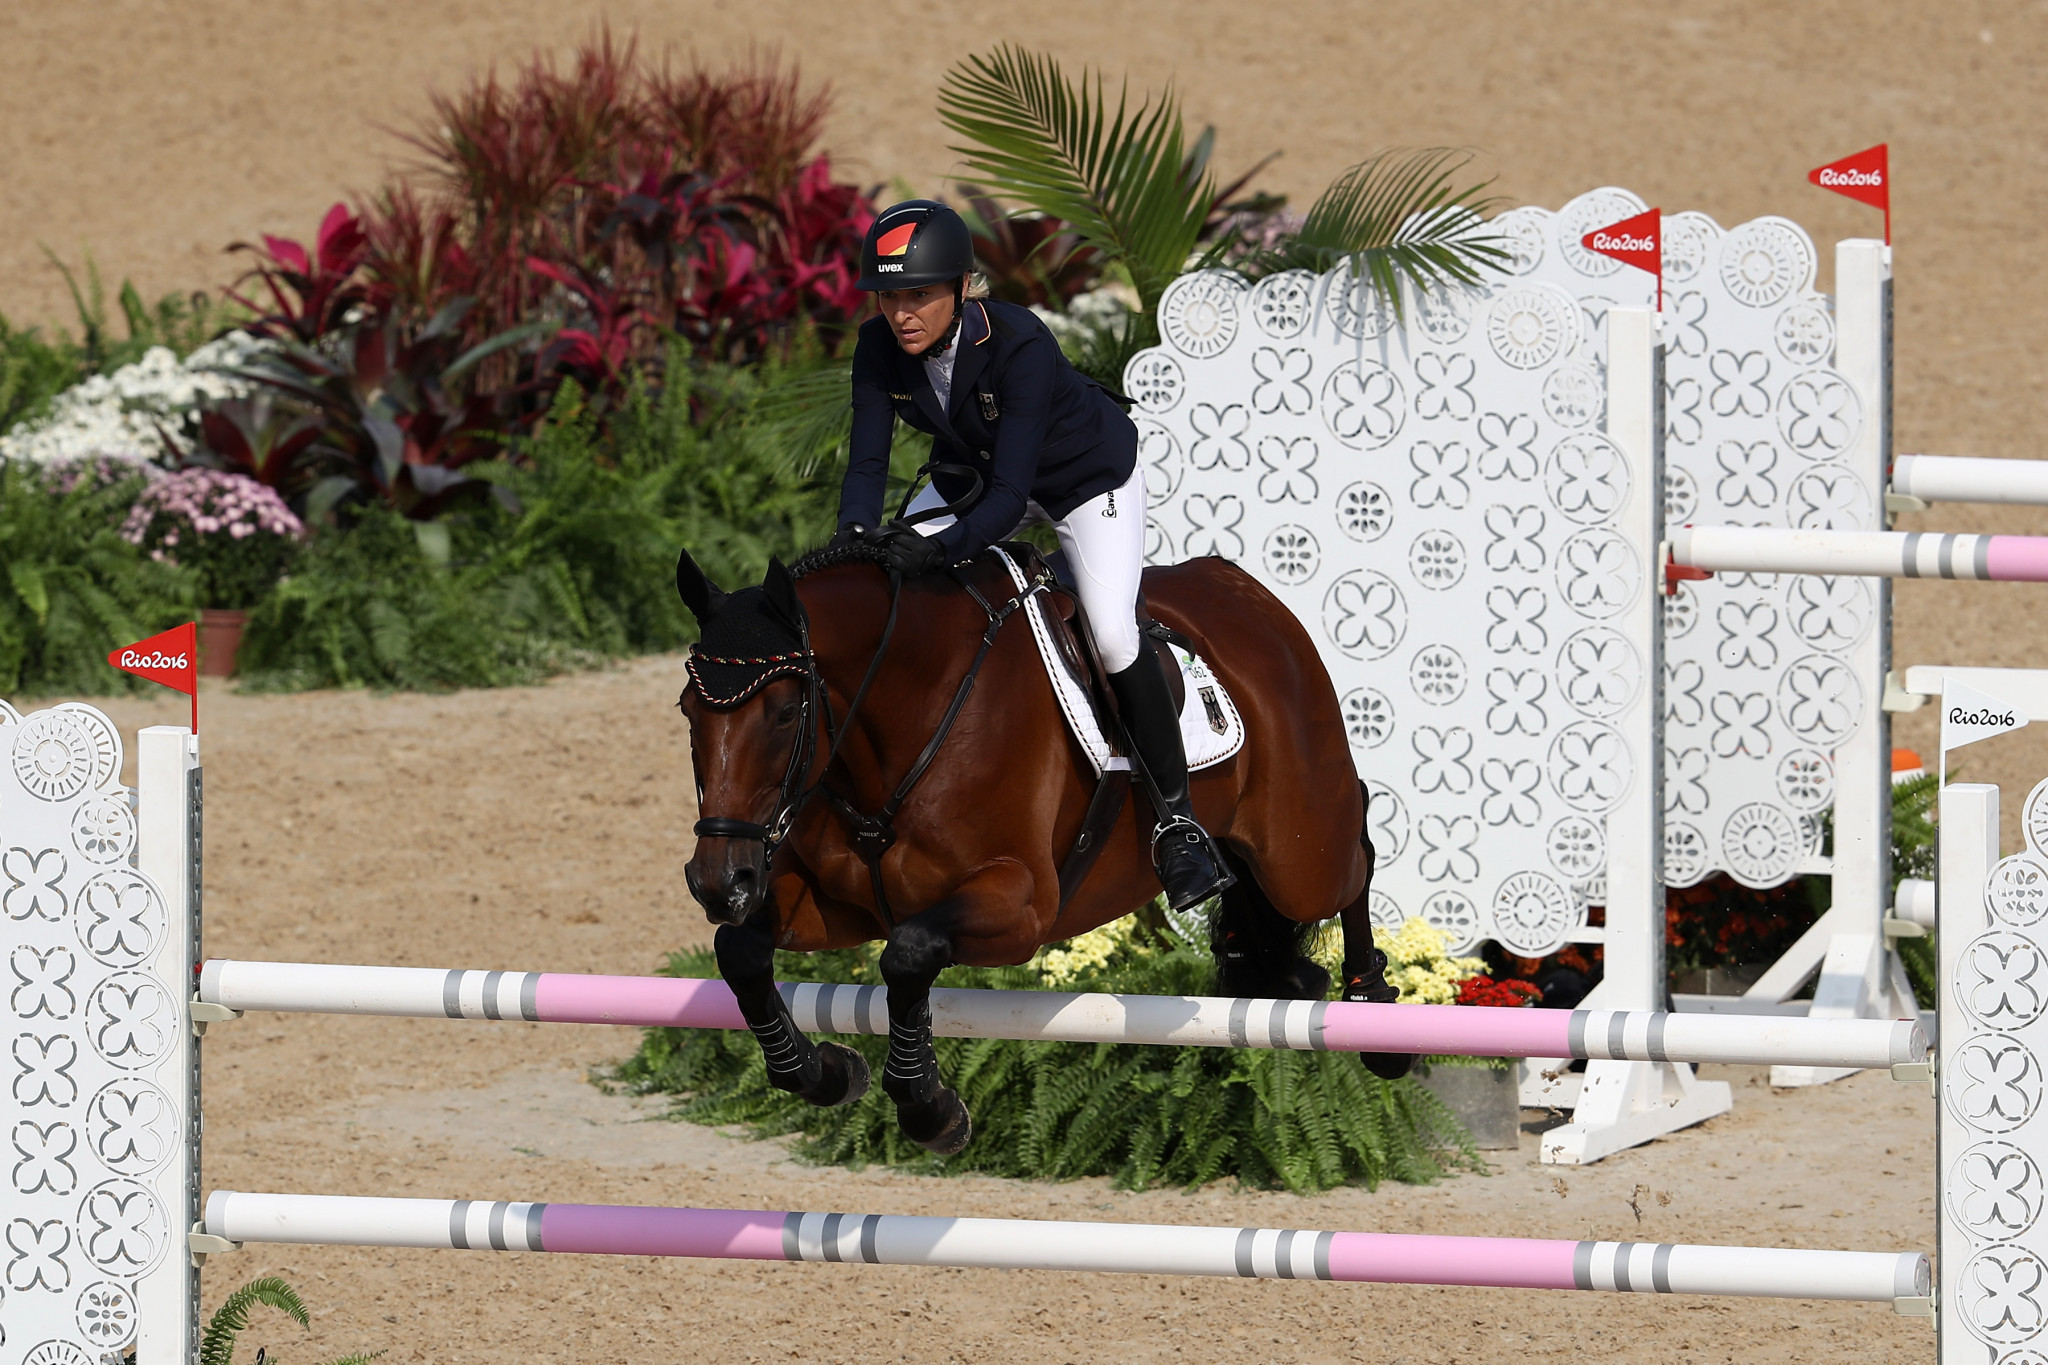 Germany's European champion lost her individual lead after showjumping errors in the FEI Nations Cup Eventing at Houghton Hall ©Getty Images